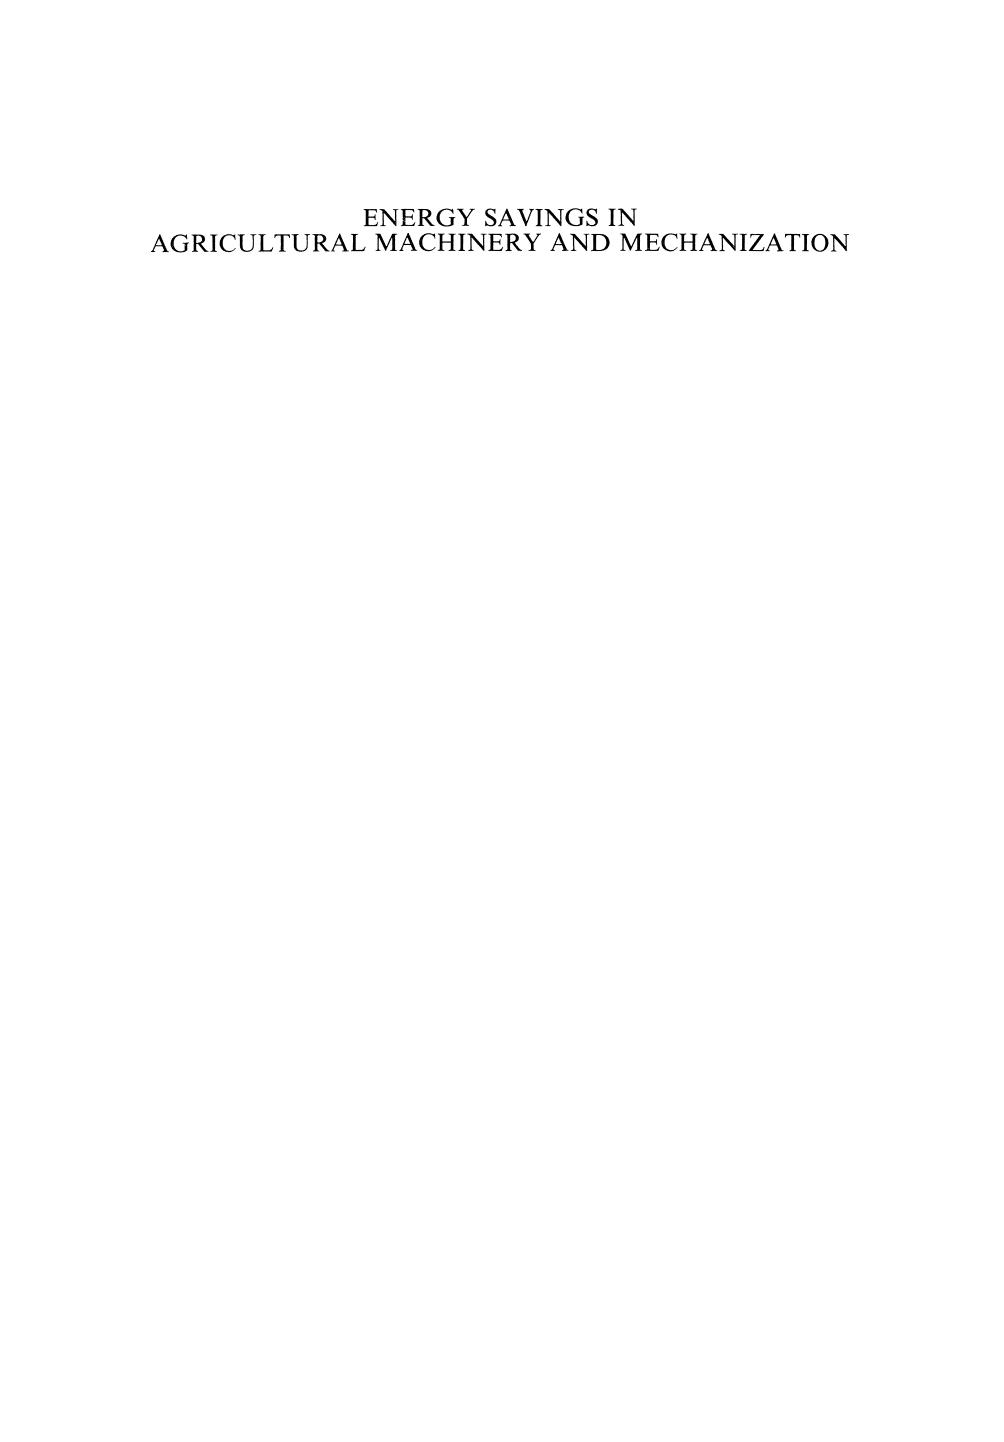 Energy Savings in Agricultural Machinery and Mechanization 1988